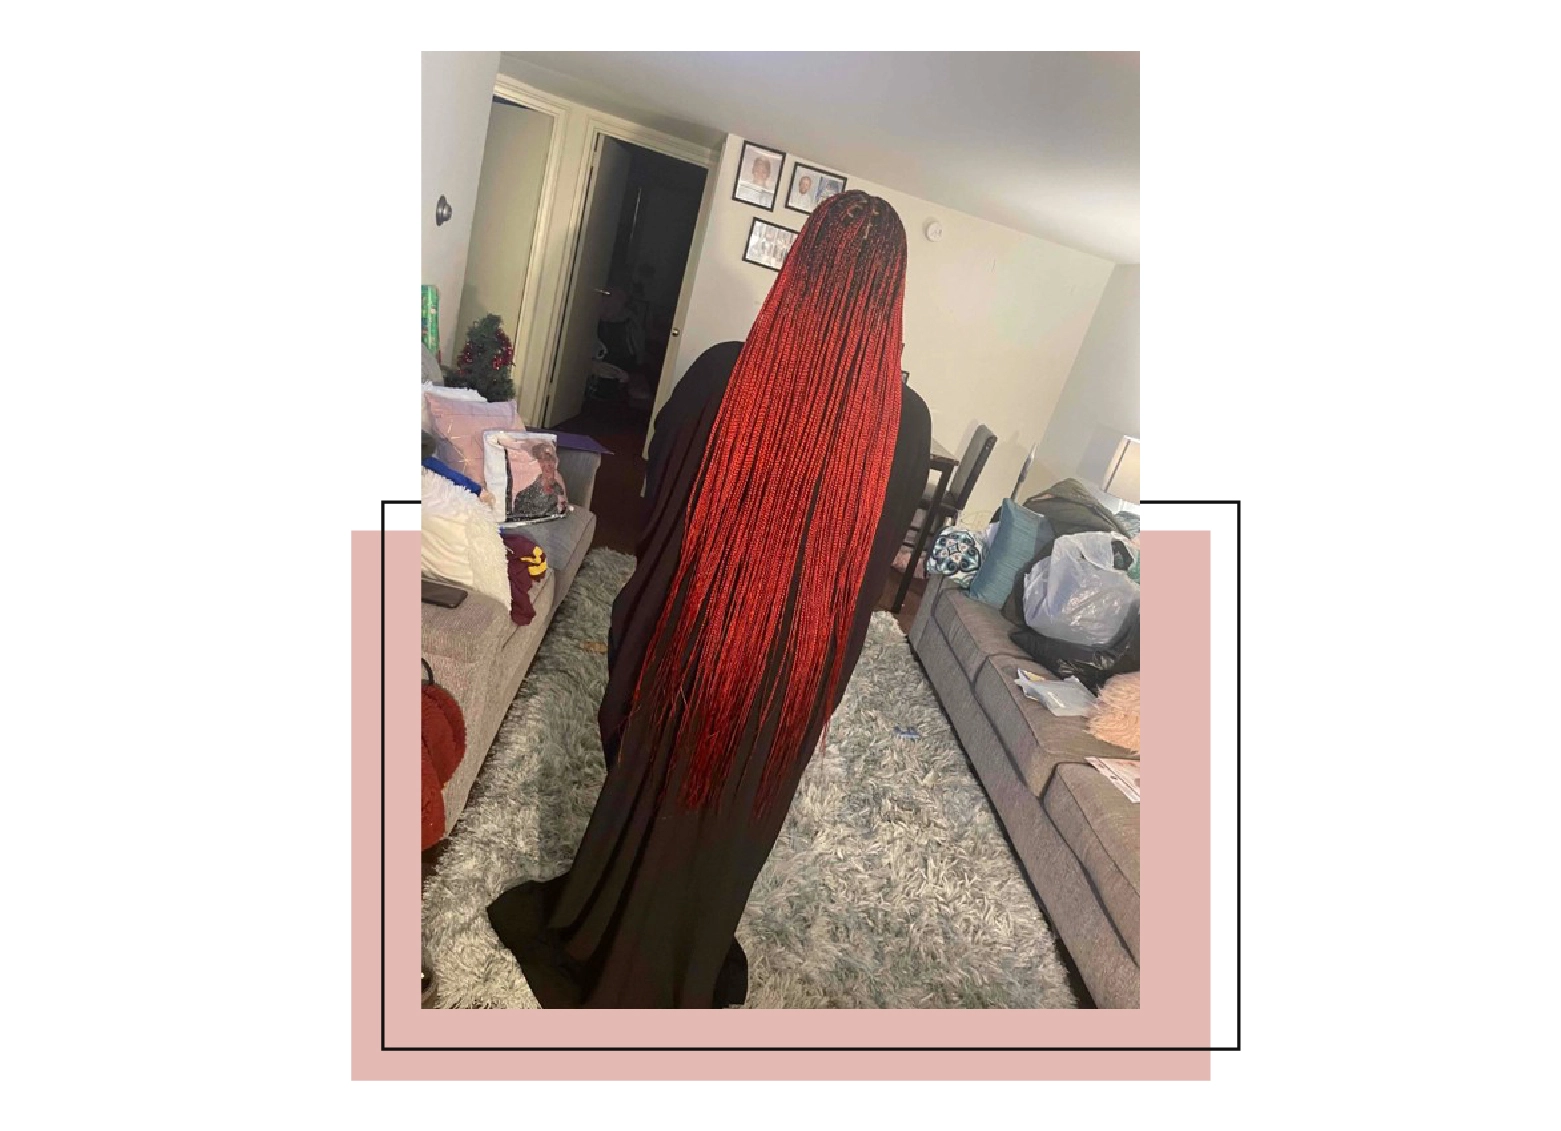 Woman with super long microbraids that are long enough to reach her legs.